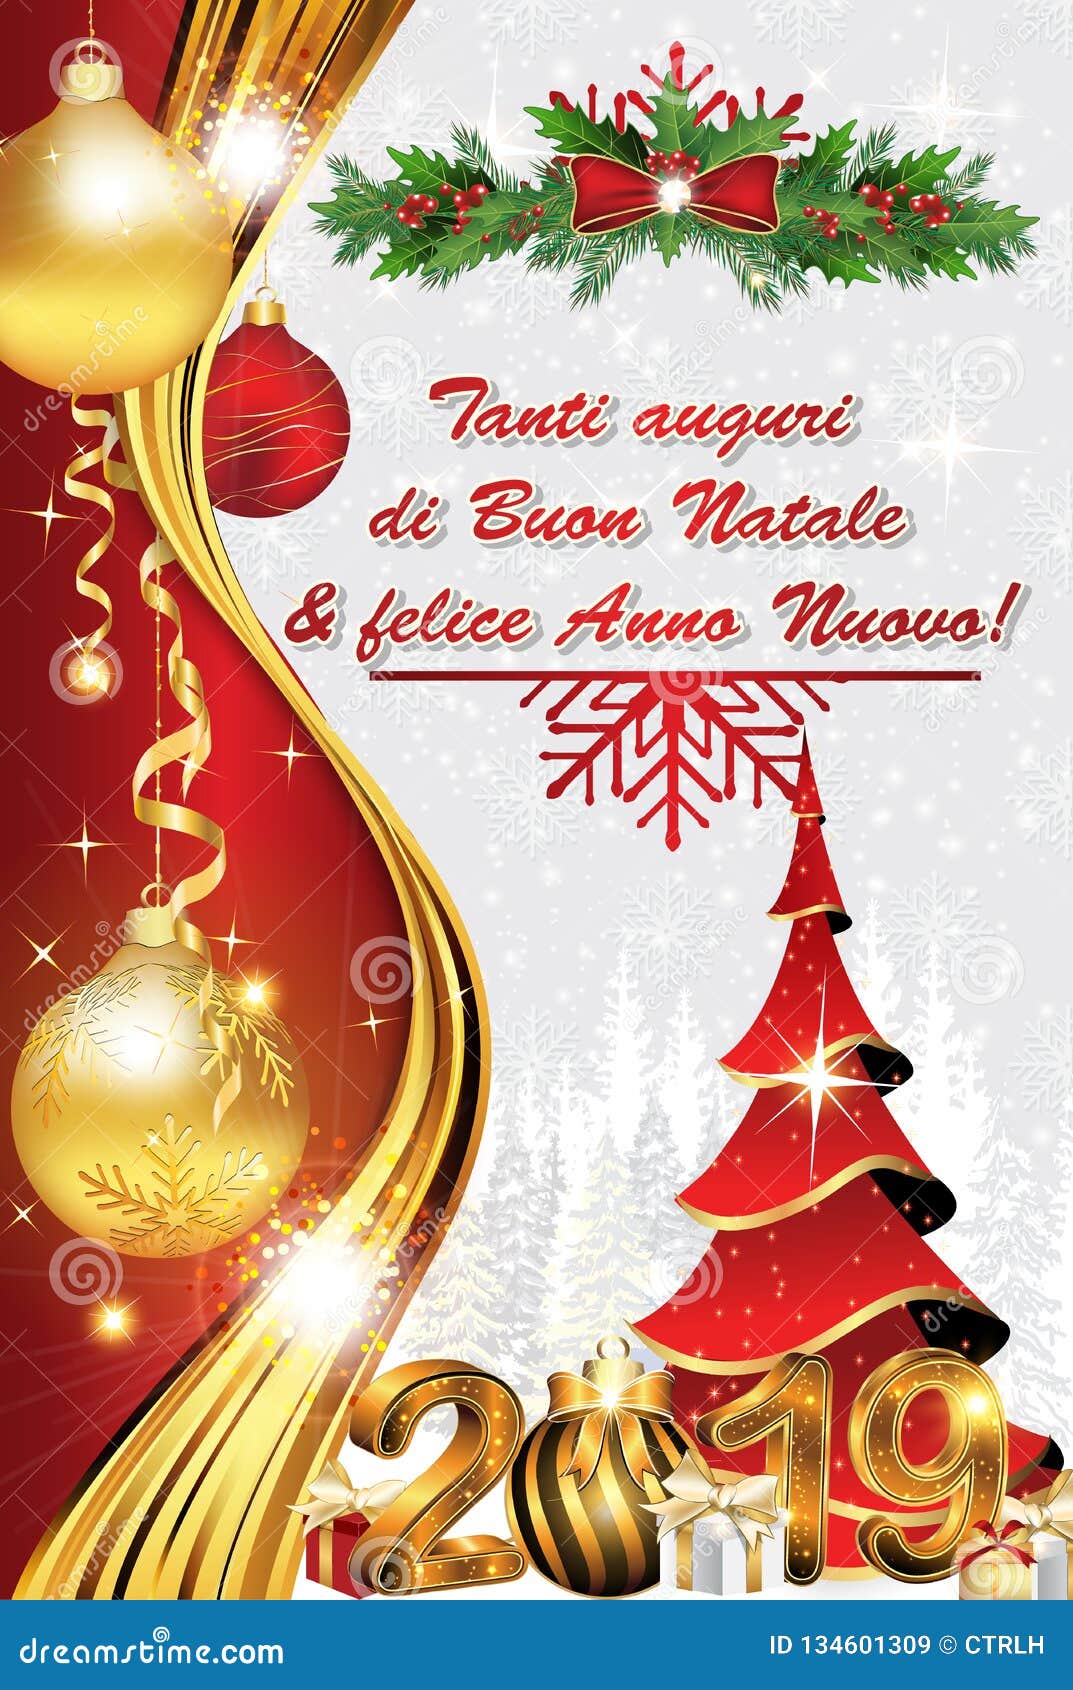 Auguri Di Natale Translation.Italian Greeting Card With Classic Design Merry Christmas And Happy New Year Stock Illustration Illustration Of Companies Jingle 134601309